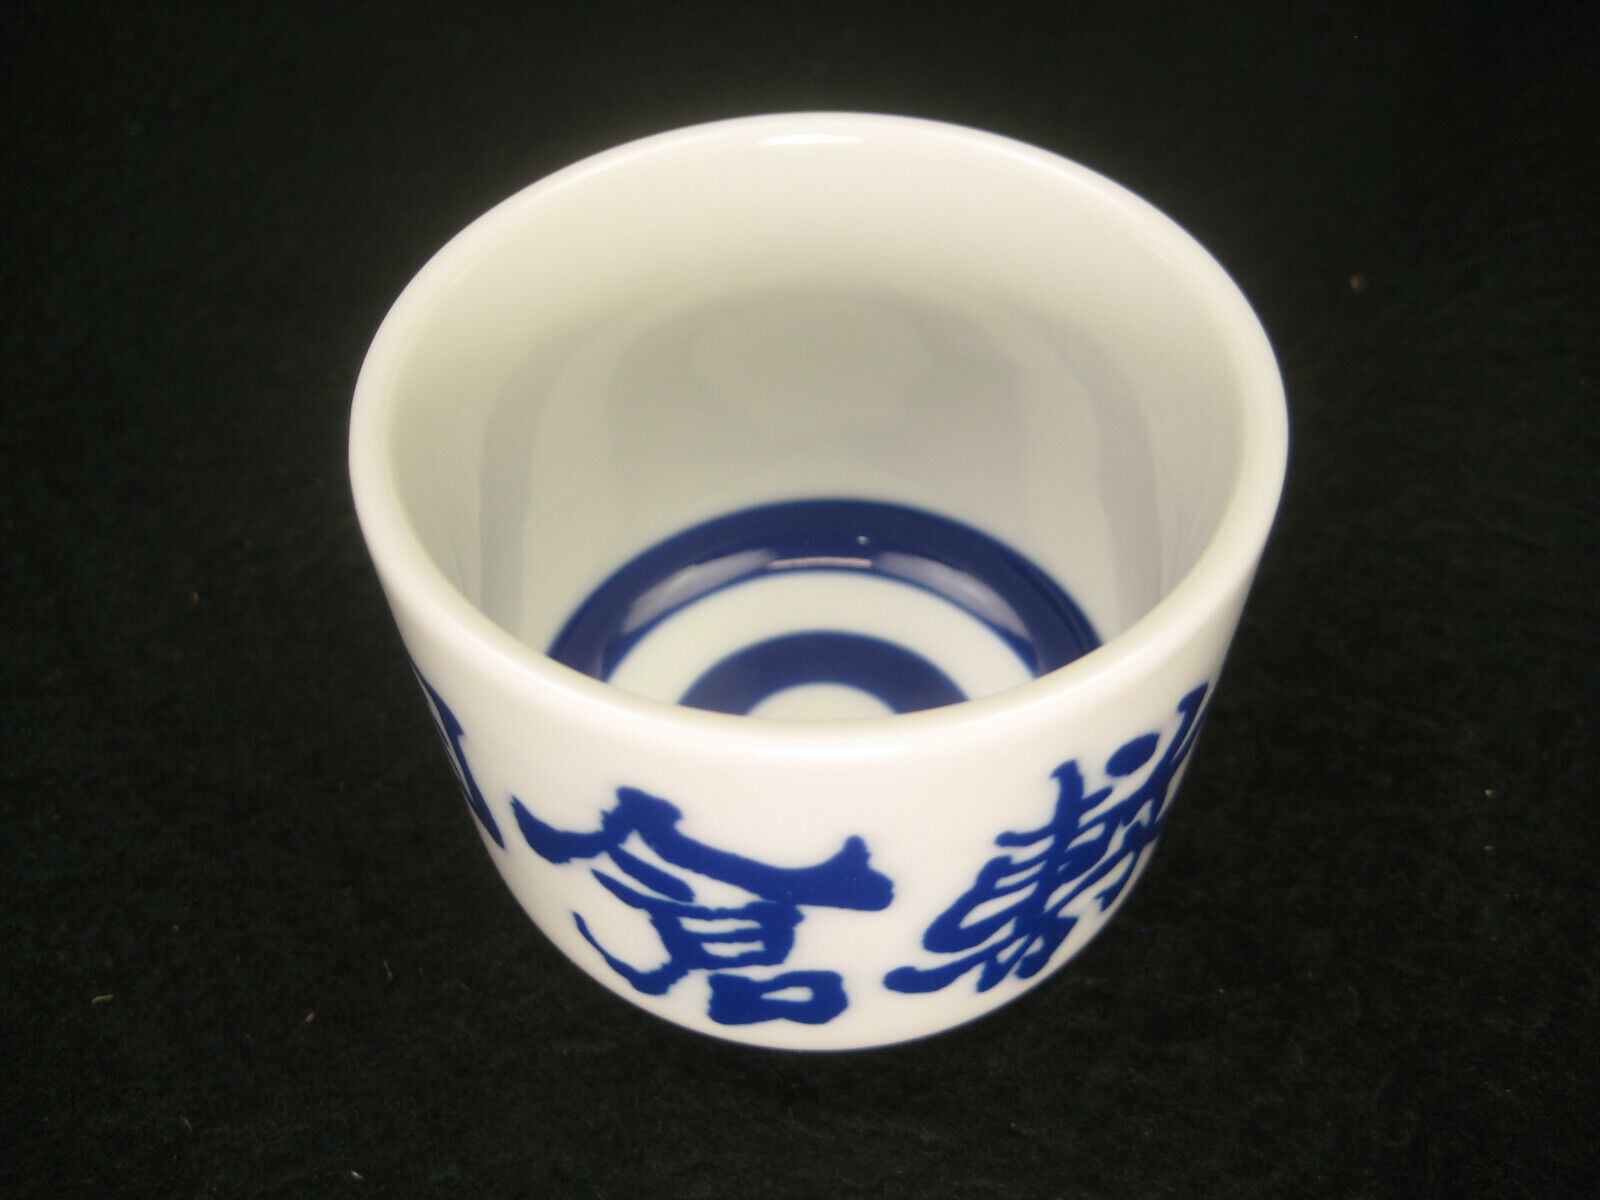 What Are Ochoko? 6 Things to Know About Japanese Sake Cups